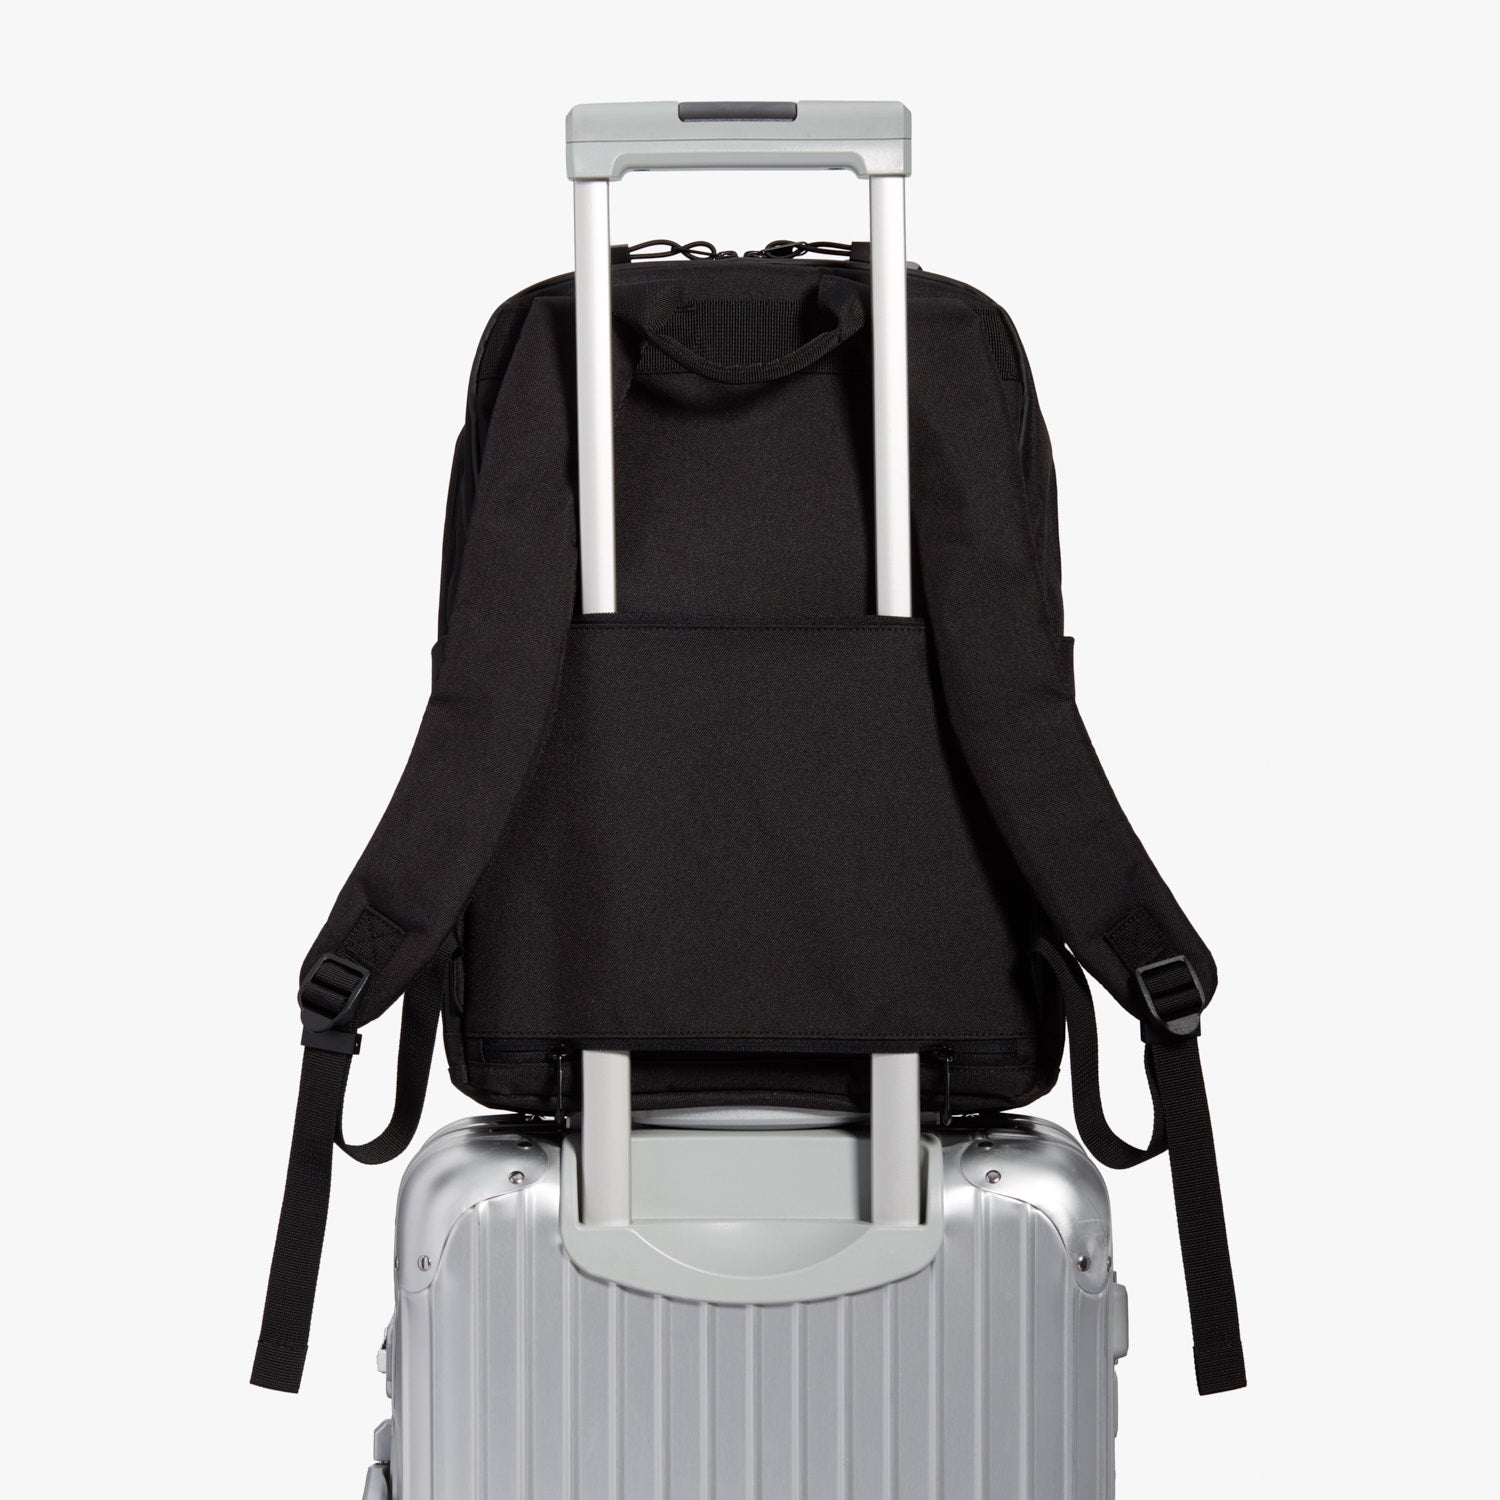 Deux Lux - Save on Luggage, Carry ons , accessories , apparel , backpacks   and More!